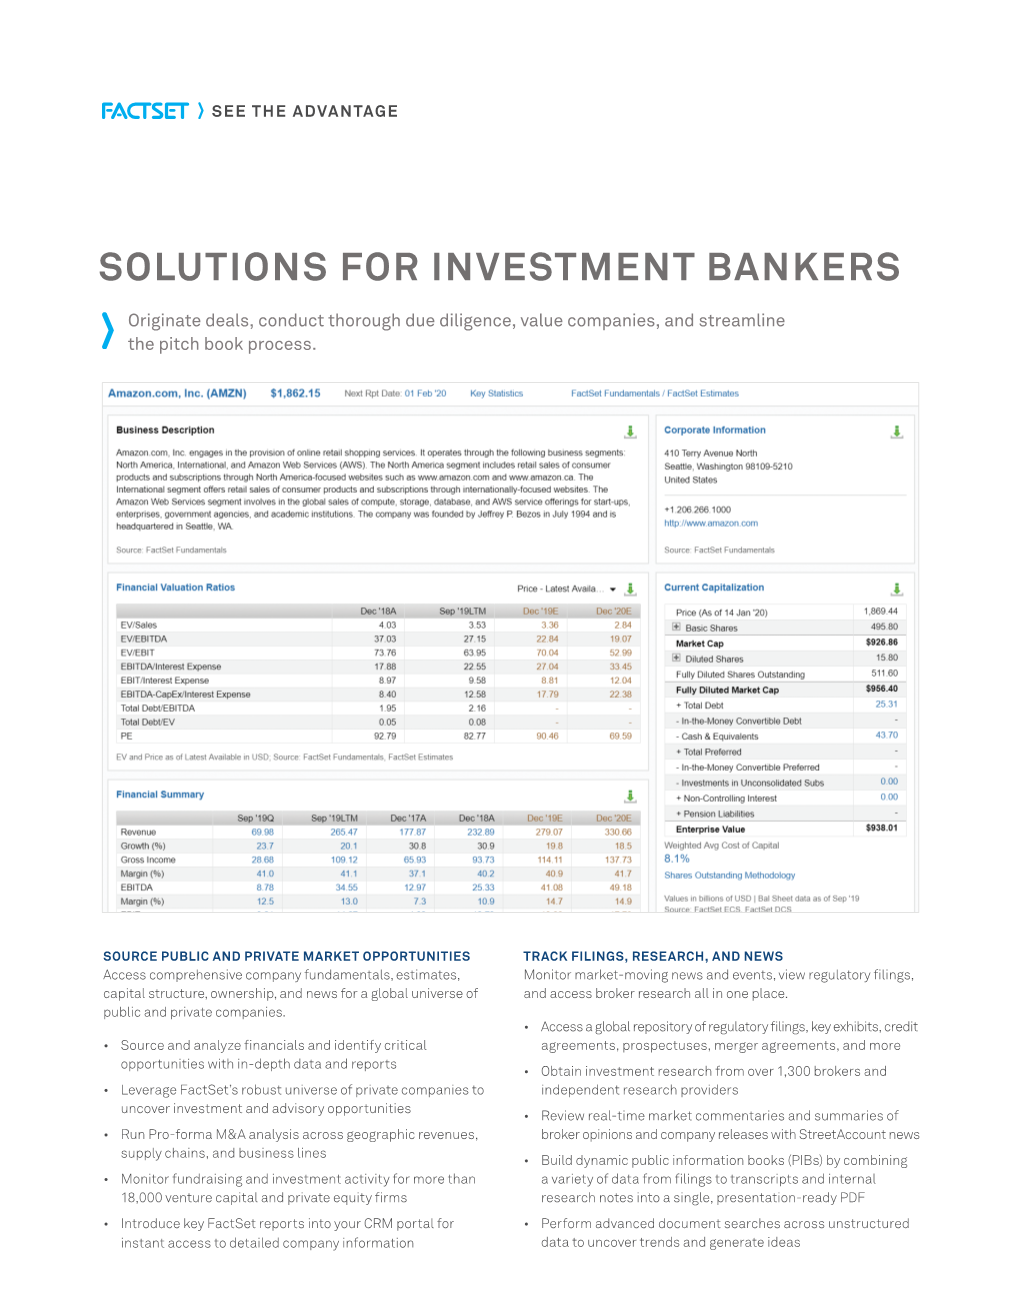 Solutions for Investment Bankers